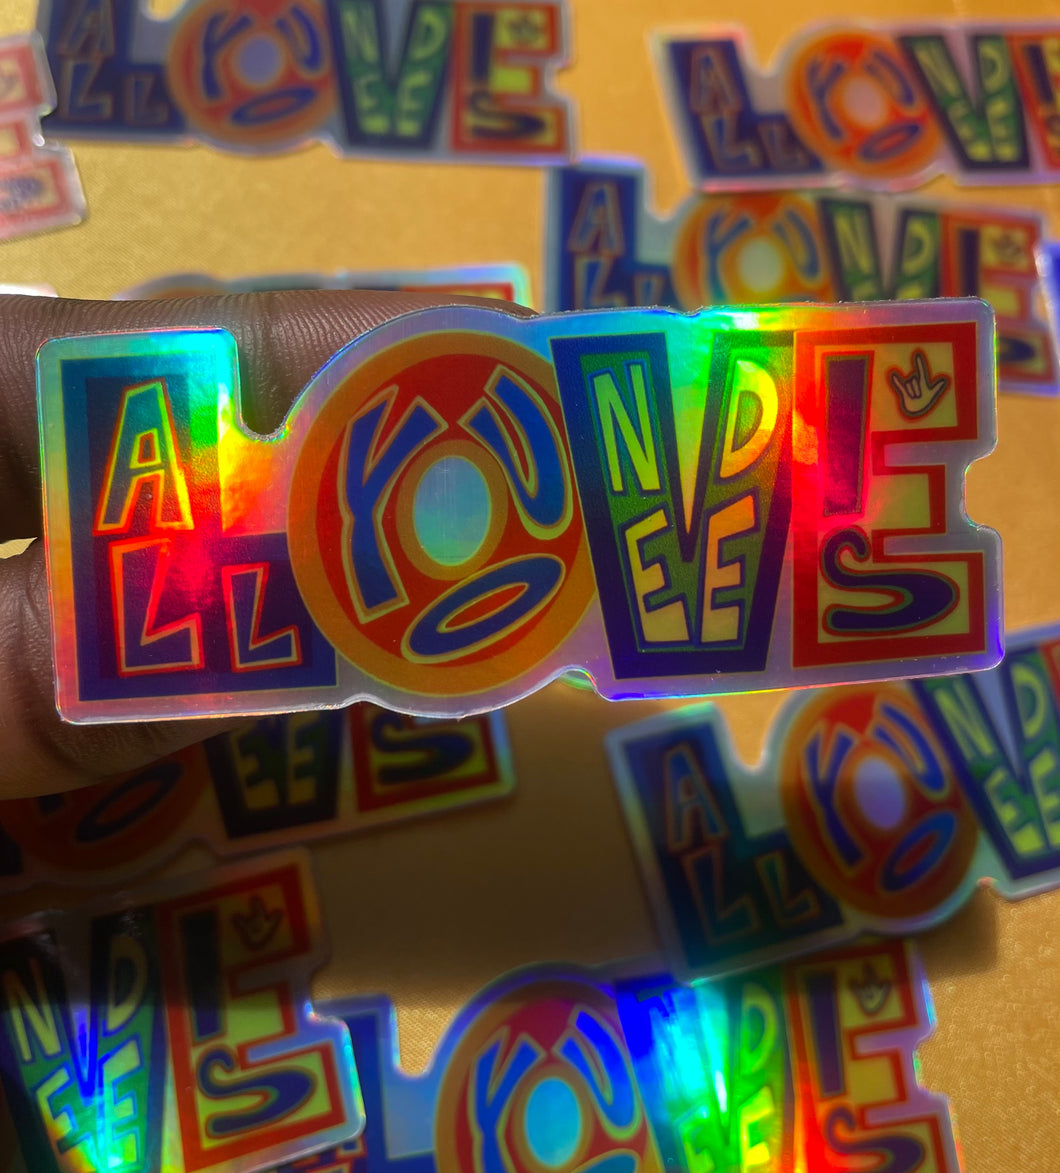 All you need is LOVE Sticker